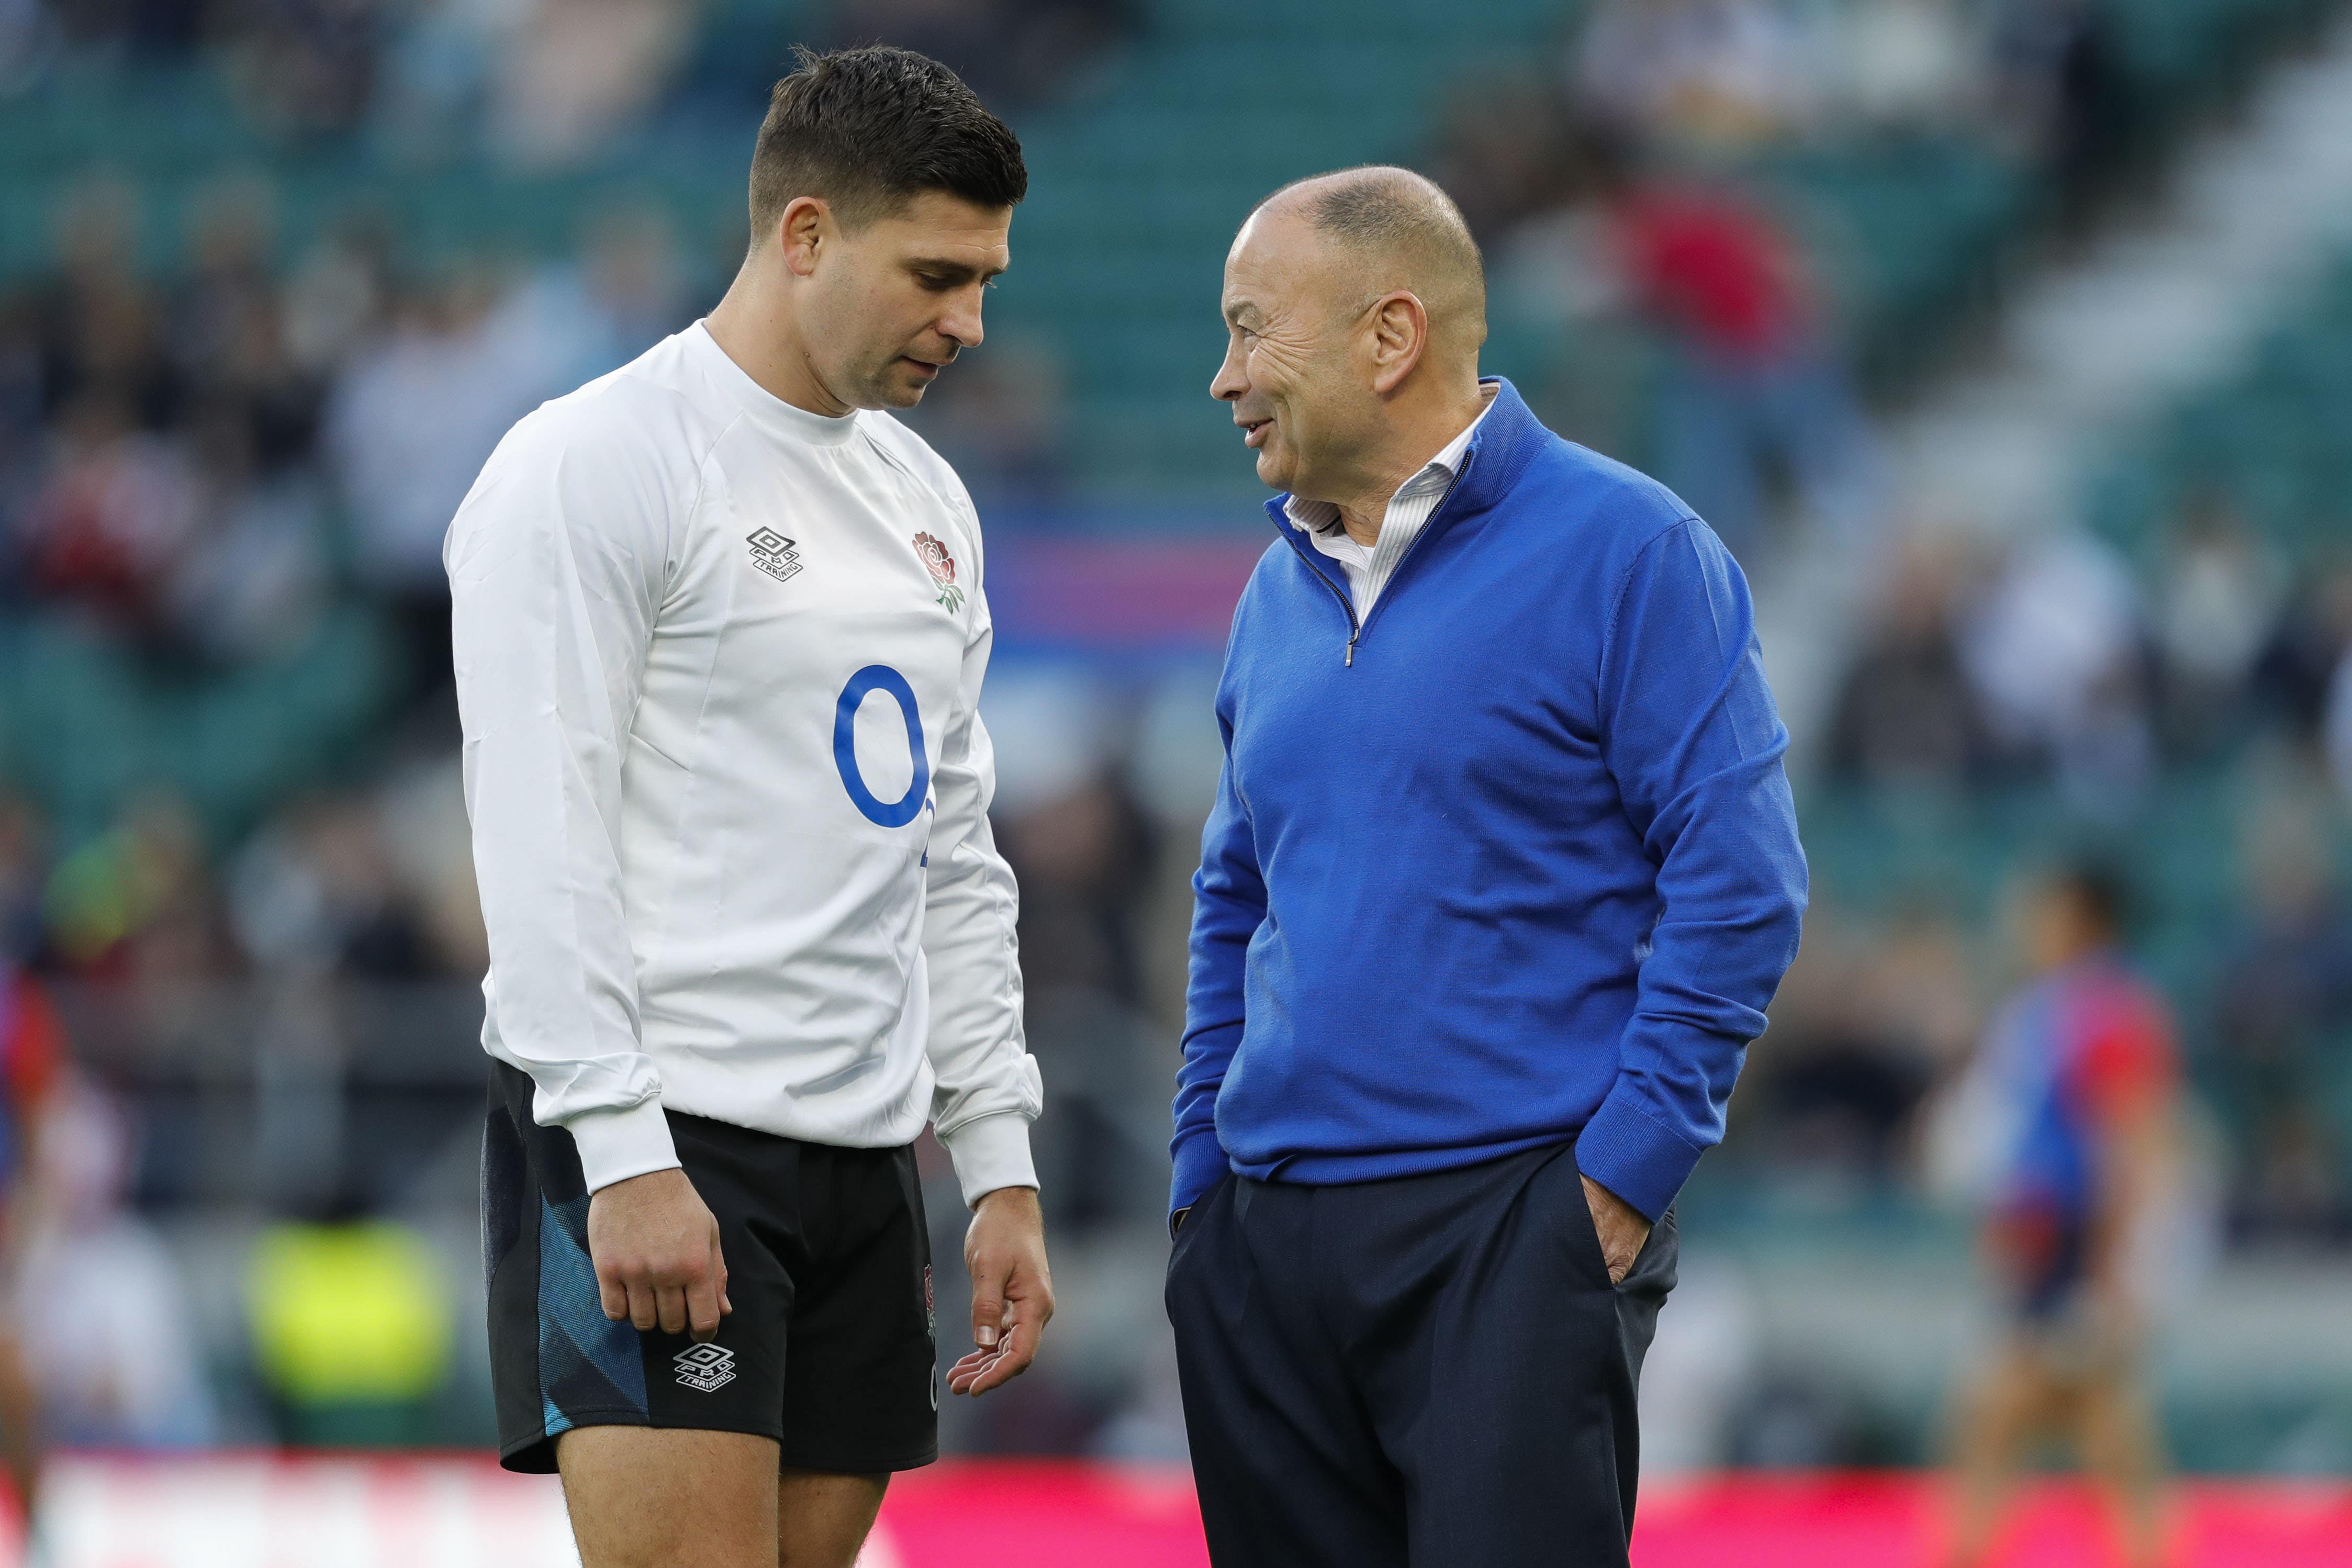 Ben Youngs has heaped praise on his former England coach Eddie Jones